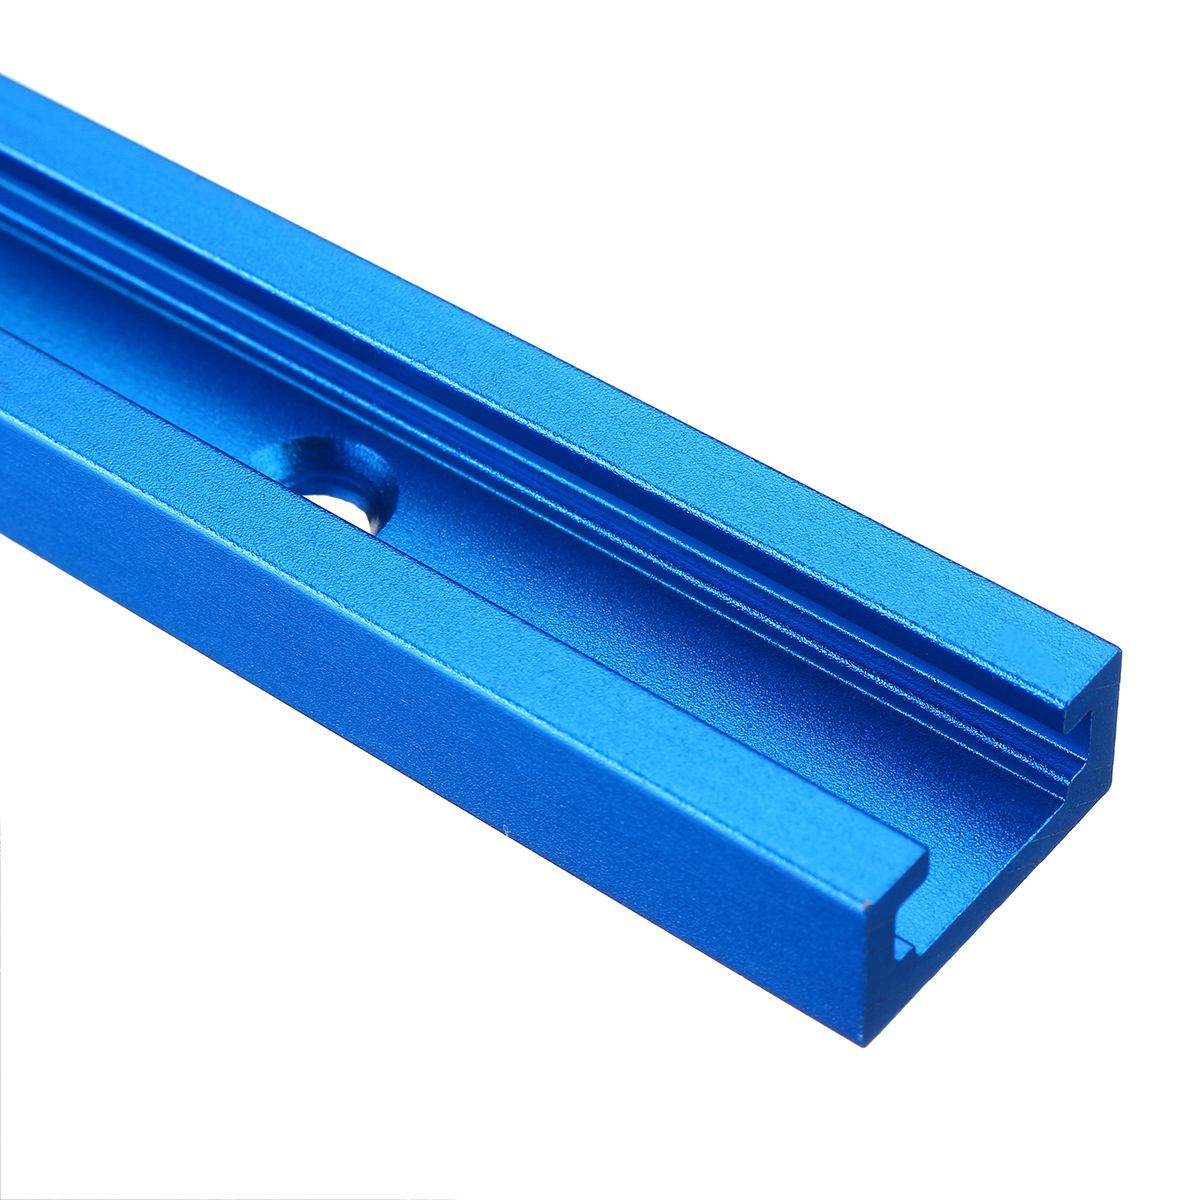 300-600mm-Aluminium-Alloy-T-track-T-slot-Miter-Track-Woodworking-Tool-for-Workbench-Router-Table-1770914-4